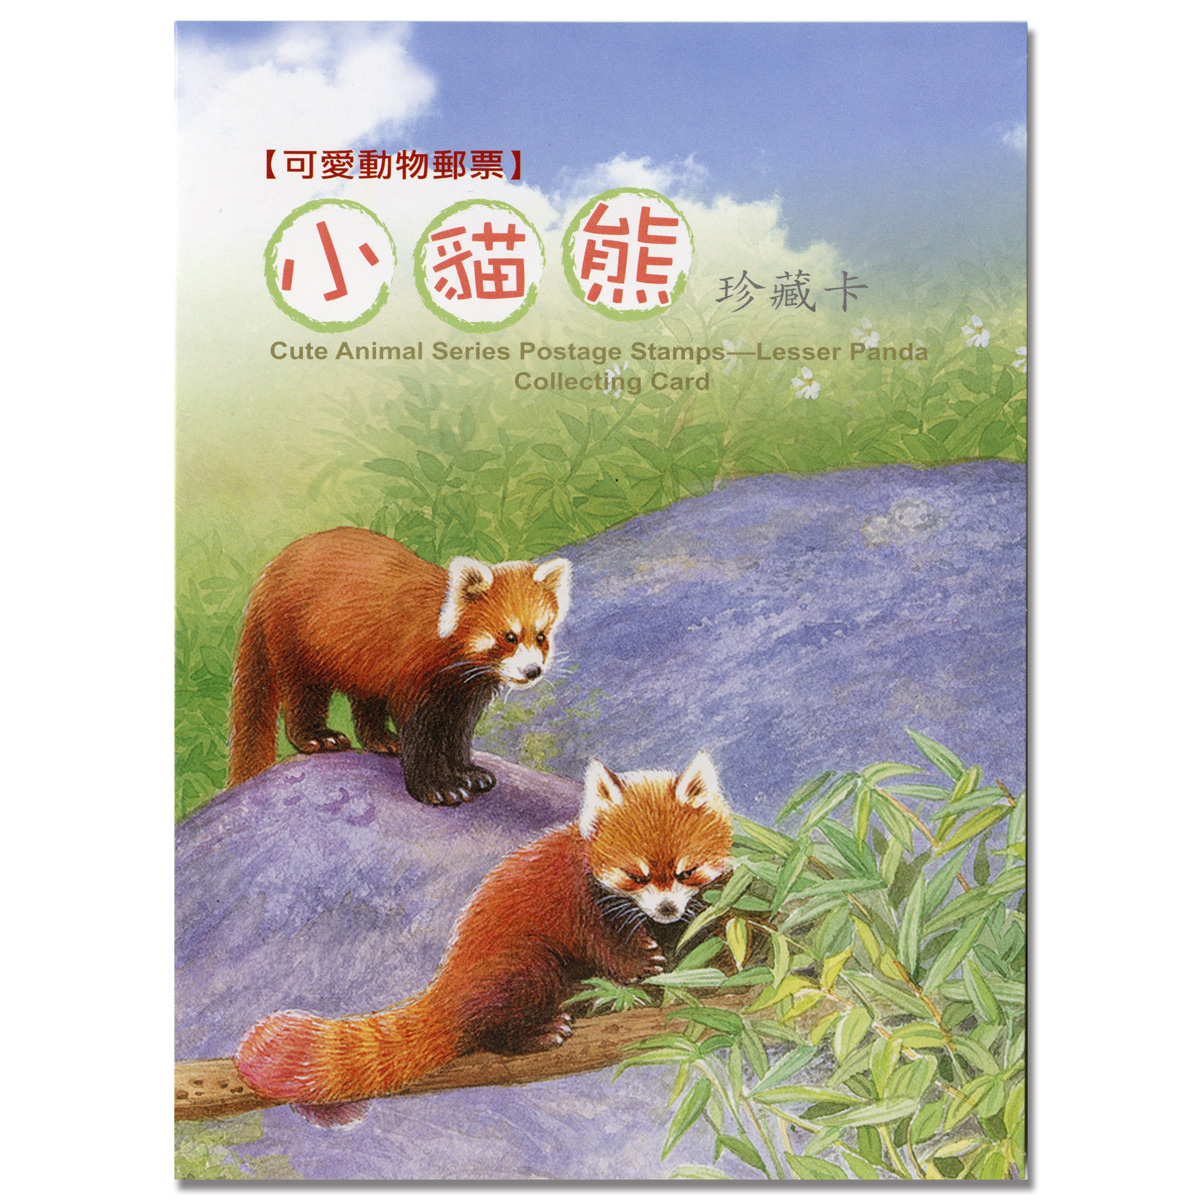 Cute Animal Series Postage Stamps－Lesser Panda Collecting Card